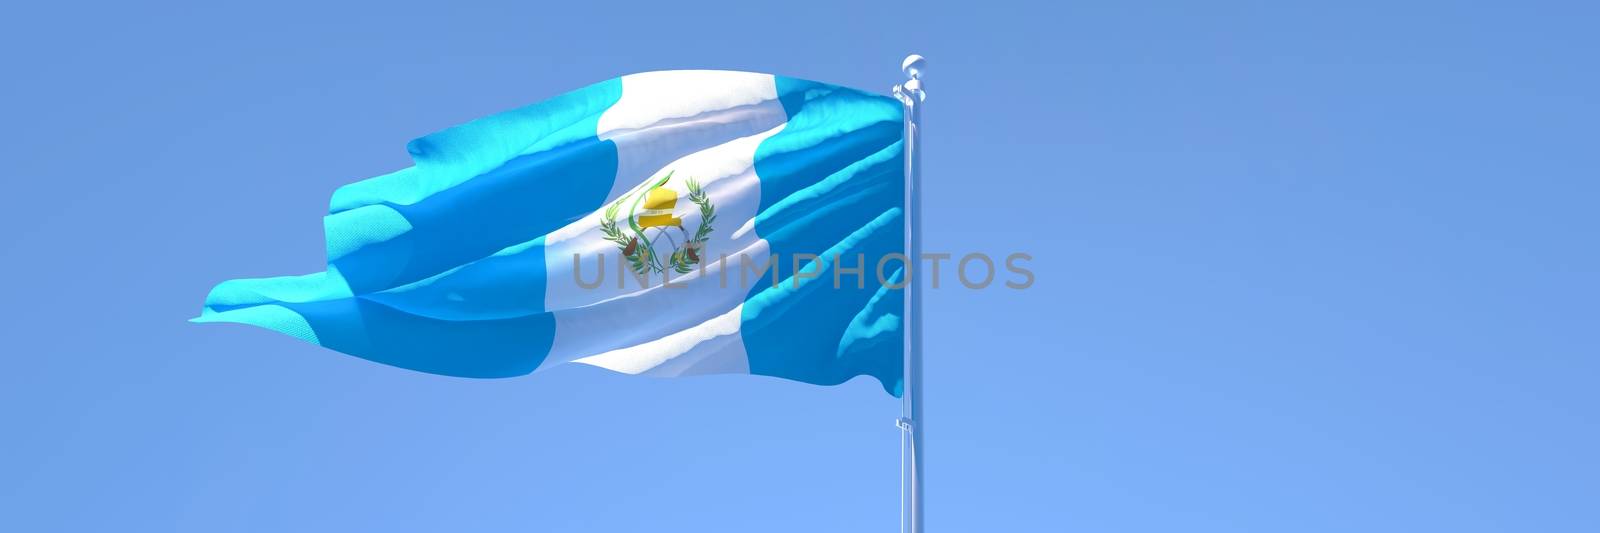 3D rendering of the national flag of Guatemala waving in the wind against a blue sky